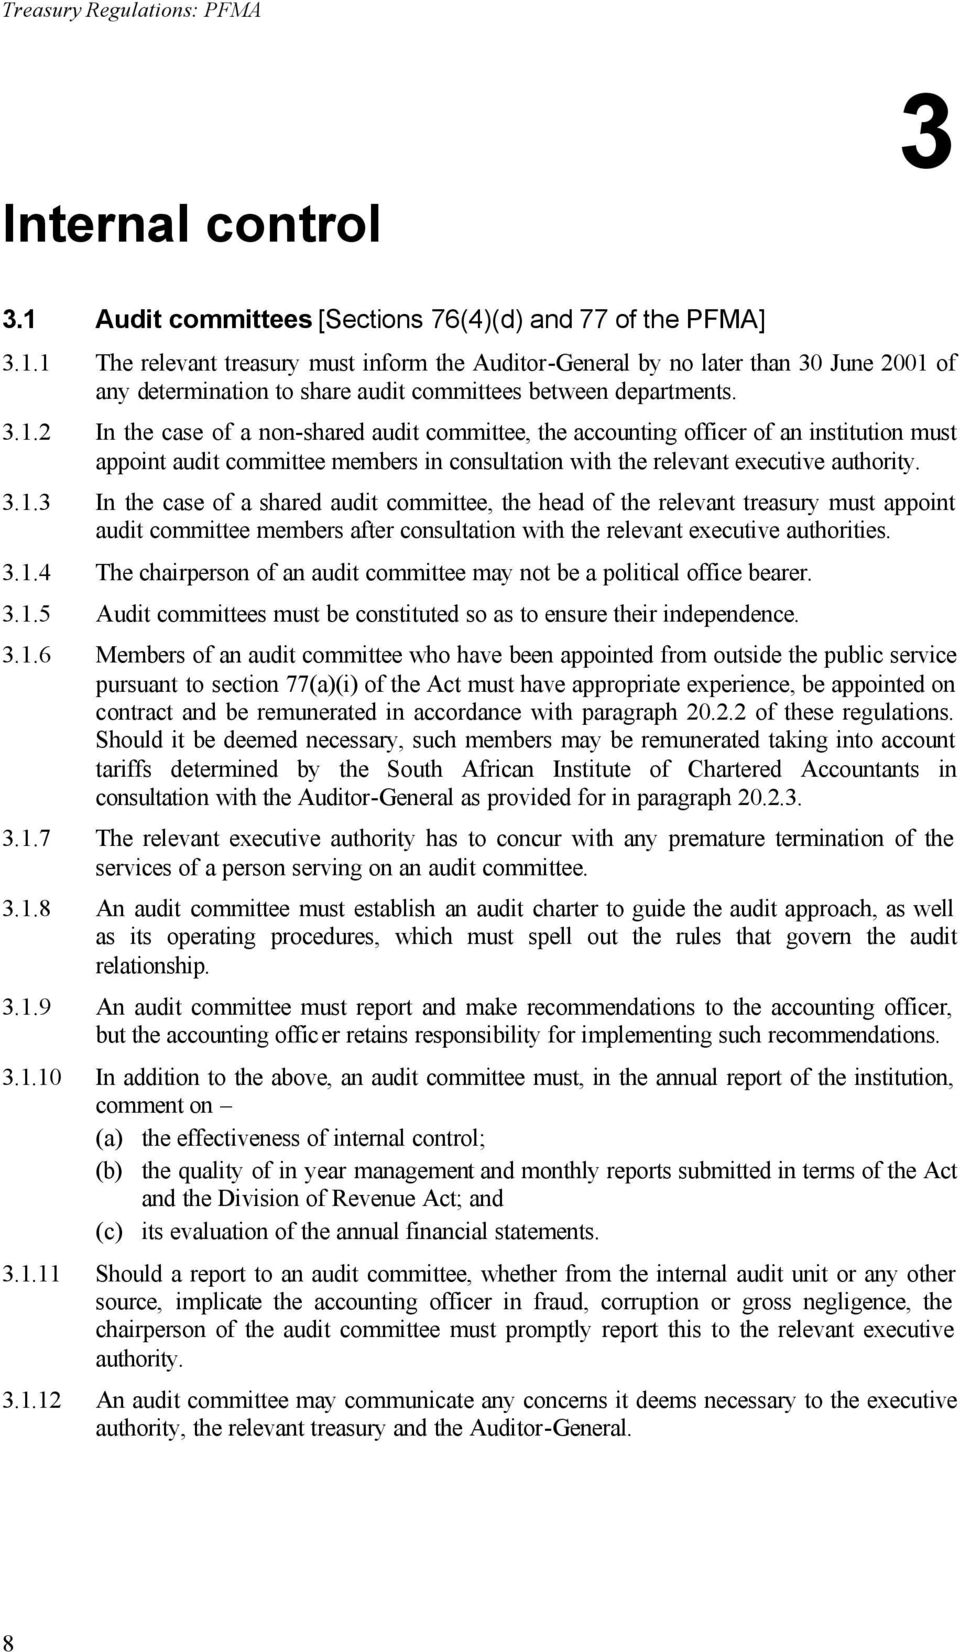 1 The relevant treasury must inform the Auditor-General by no later than 30 June 2001 of any determination to share audit committees between departments. 3.1.2 In the case of a non-shared audit committee, the accounting officer of an institution must appoint audit committee members in consultation with the relevant executive authority.